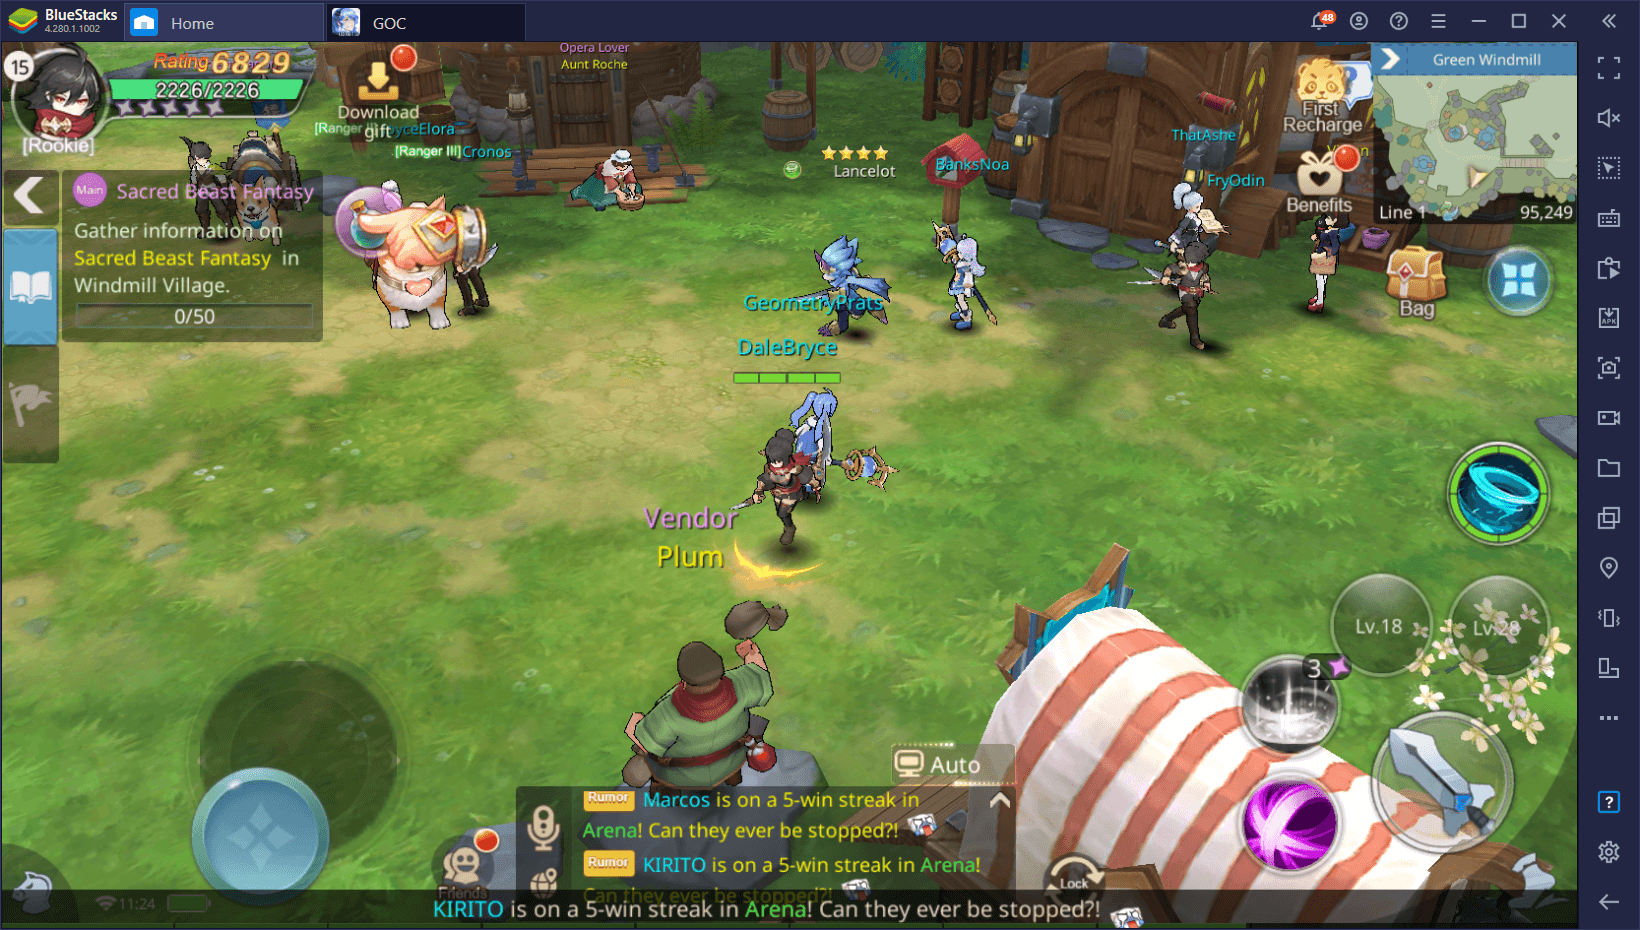 Guardians of Cloudia - How to Use BlueStacks’ Tools to Your Advantage in This Mobile MMORPG